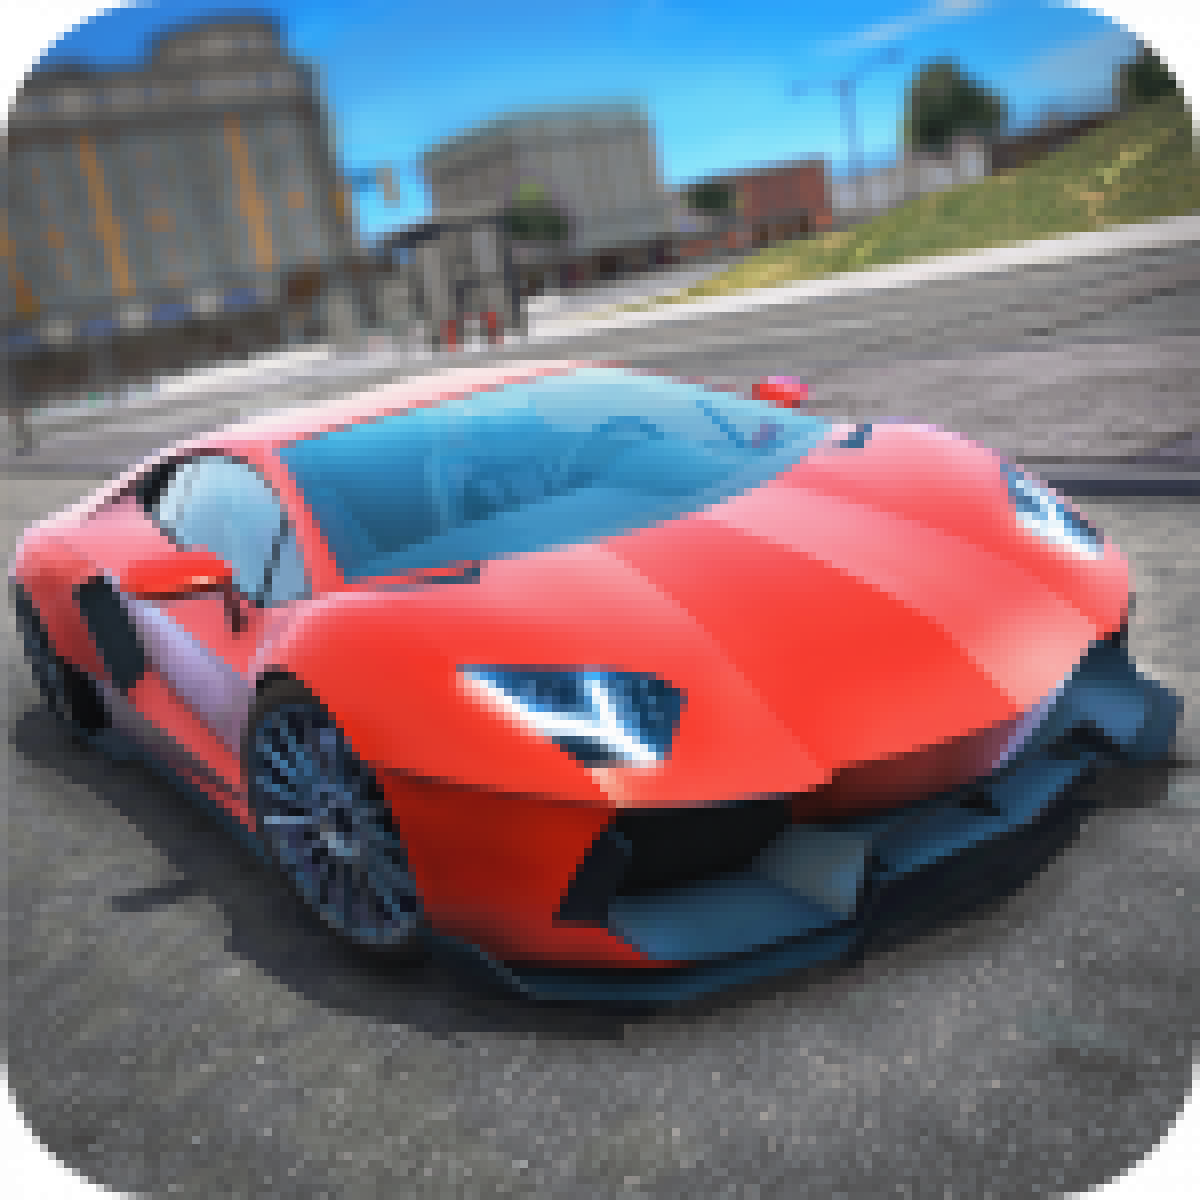 Ultimate Car Driving Simulator Mod Apk 3 3 Download Unlimited Money For Android